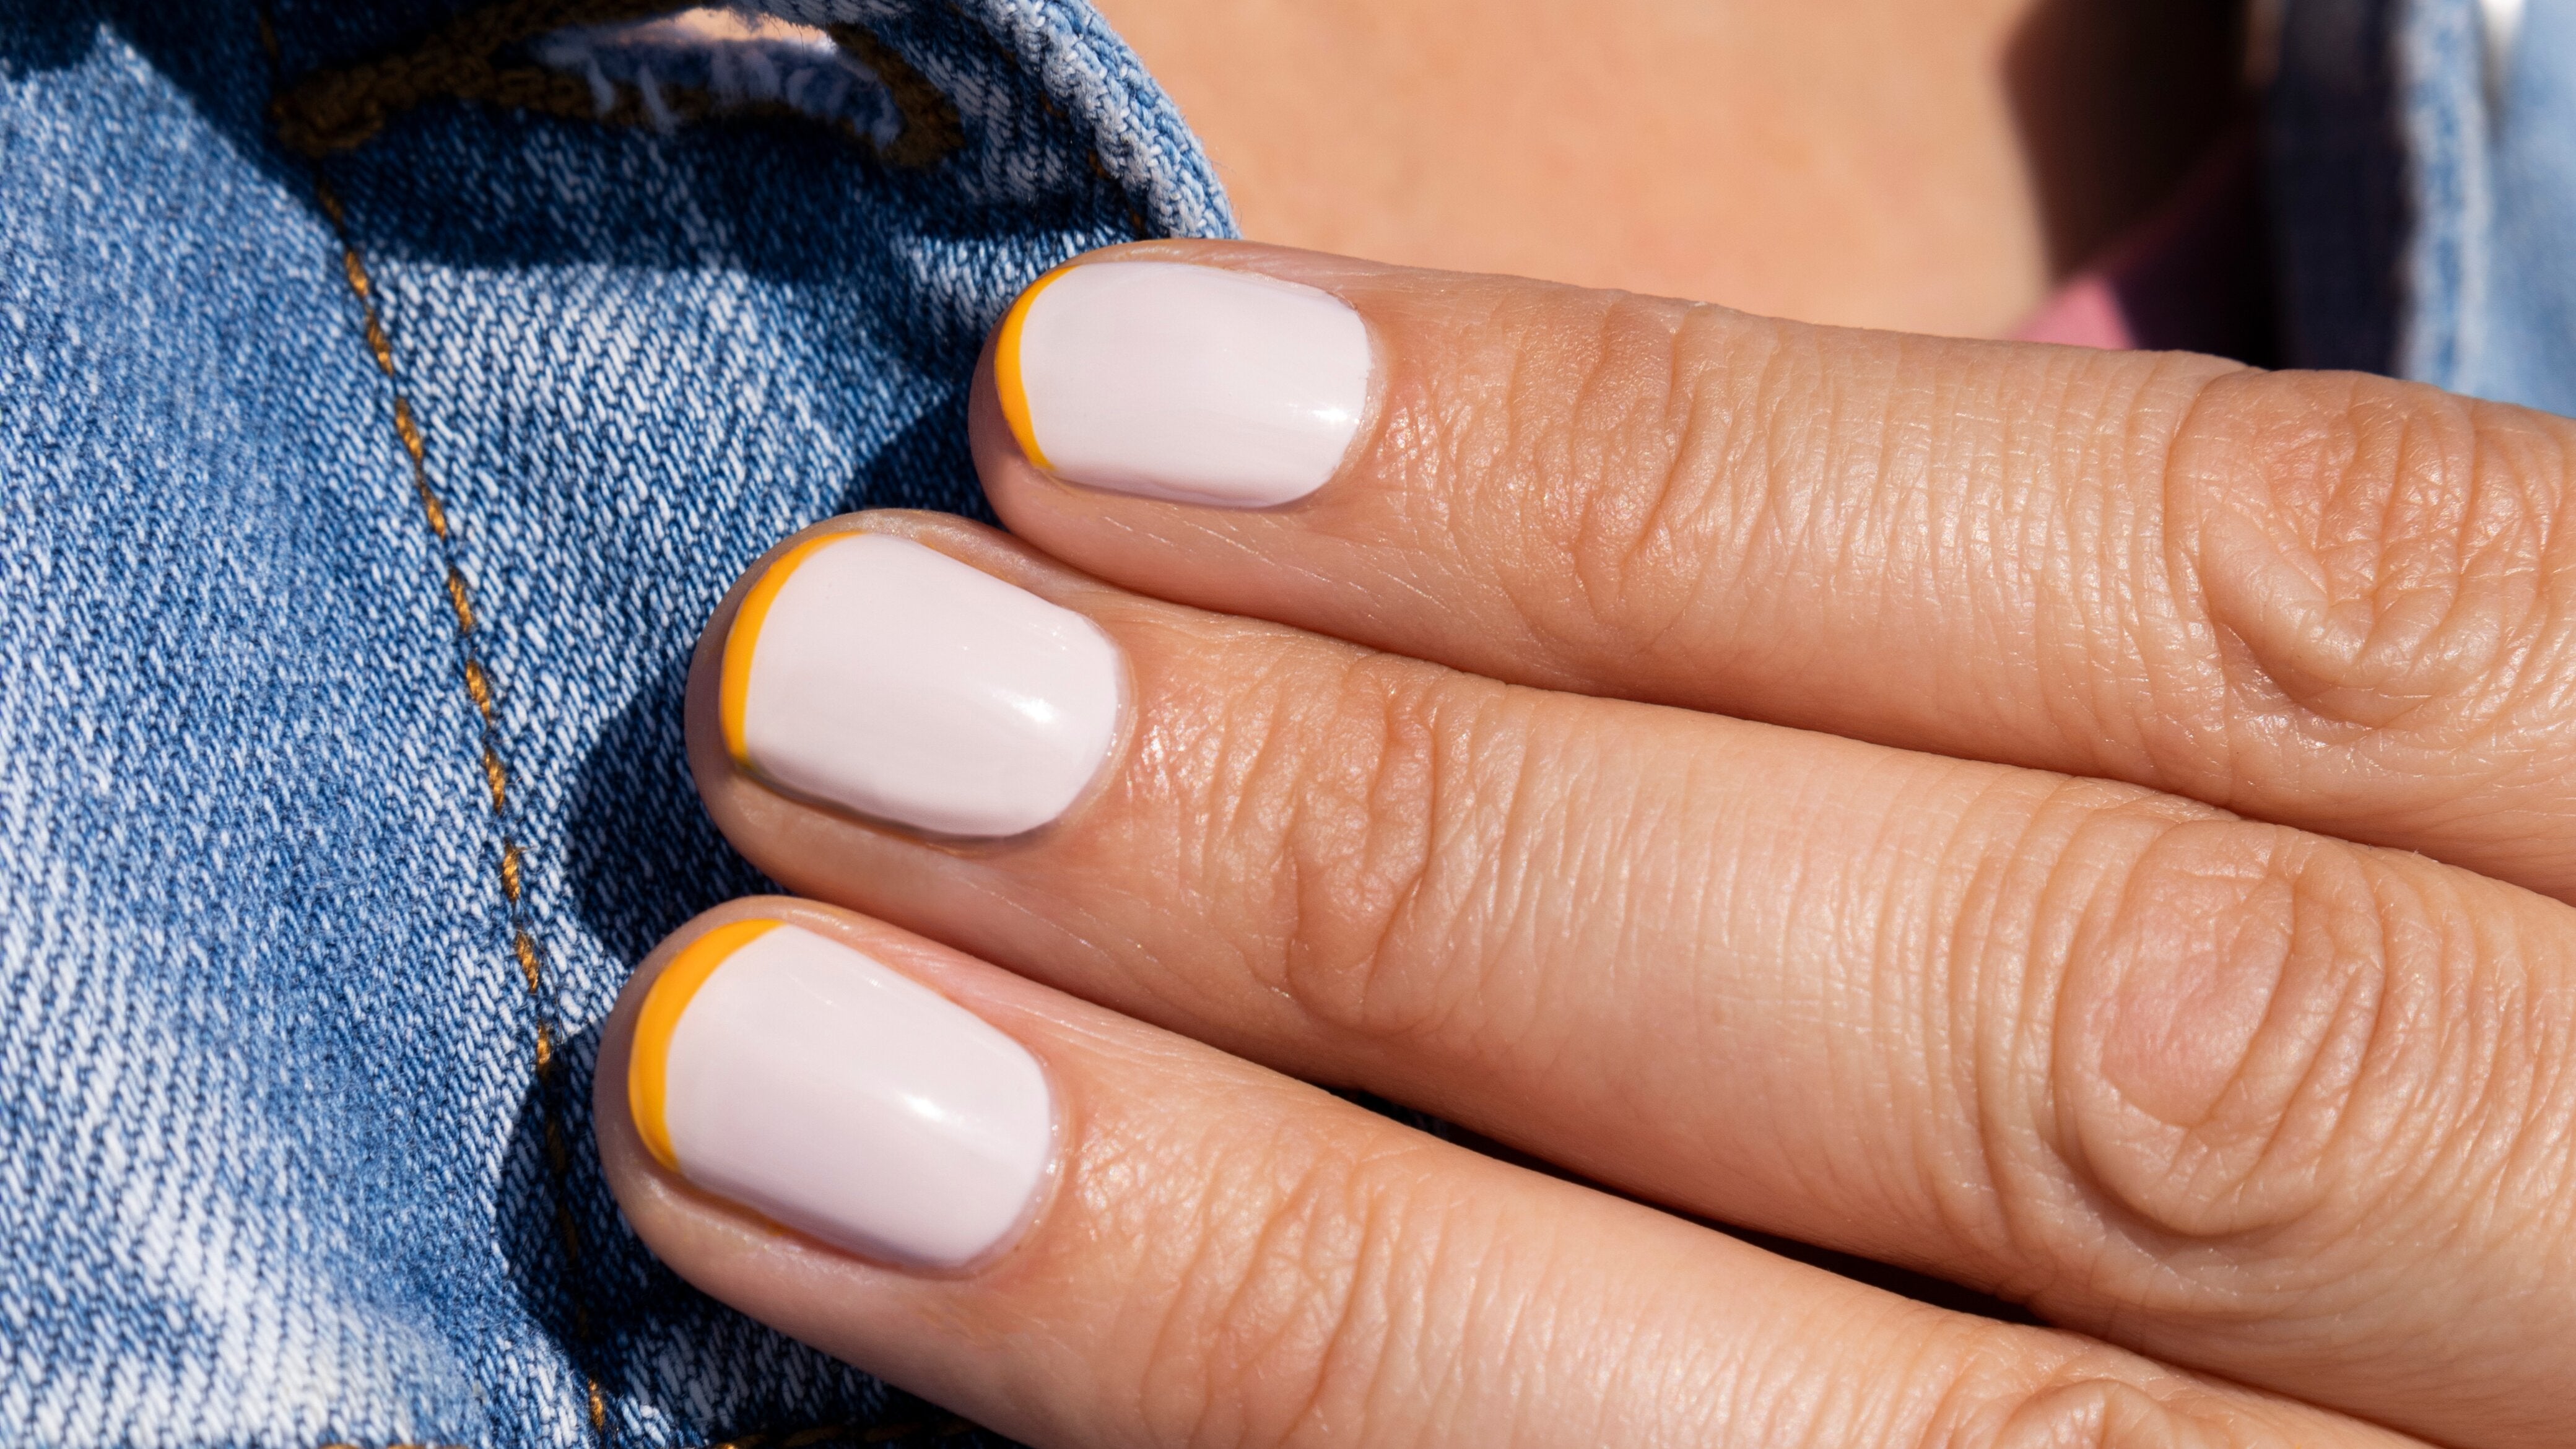 Manicure Tips to Improve Your Naked Nails  White tip nails, White nail  pencil, Pencil nails